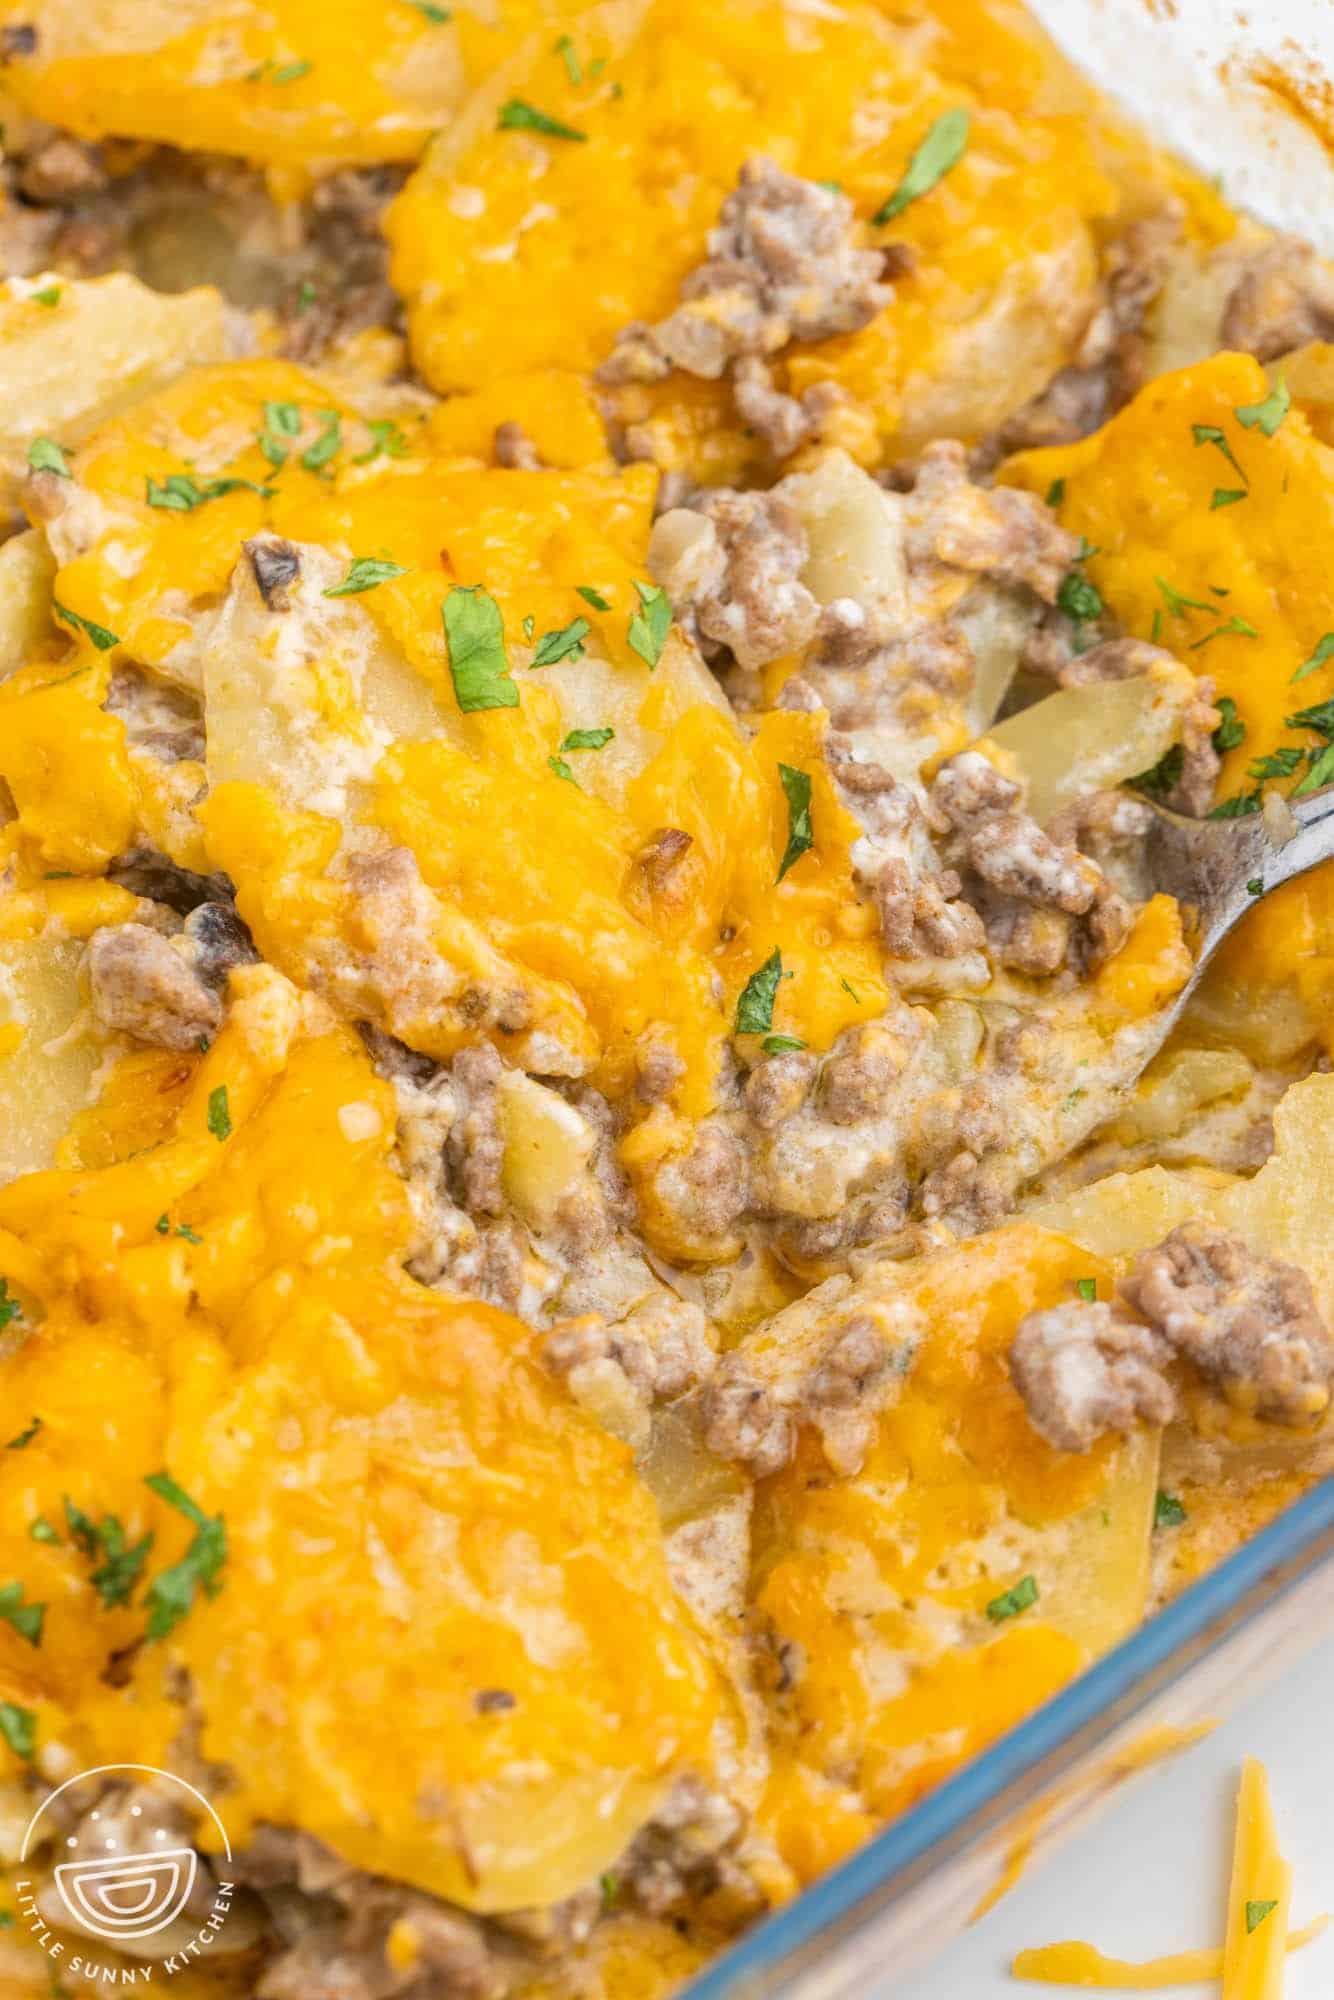 a spoon serving ground beef potato casserole from the pan.